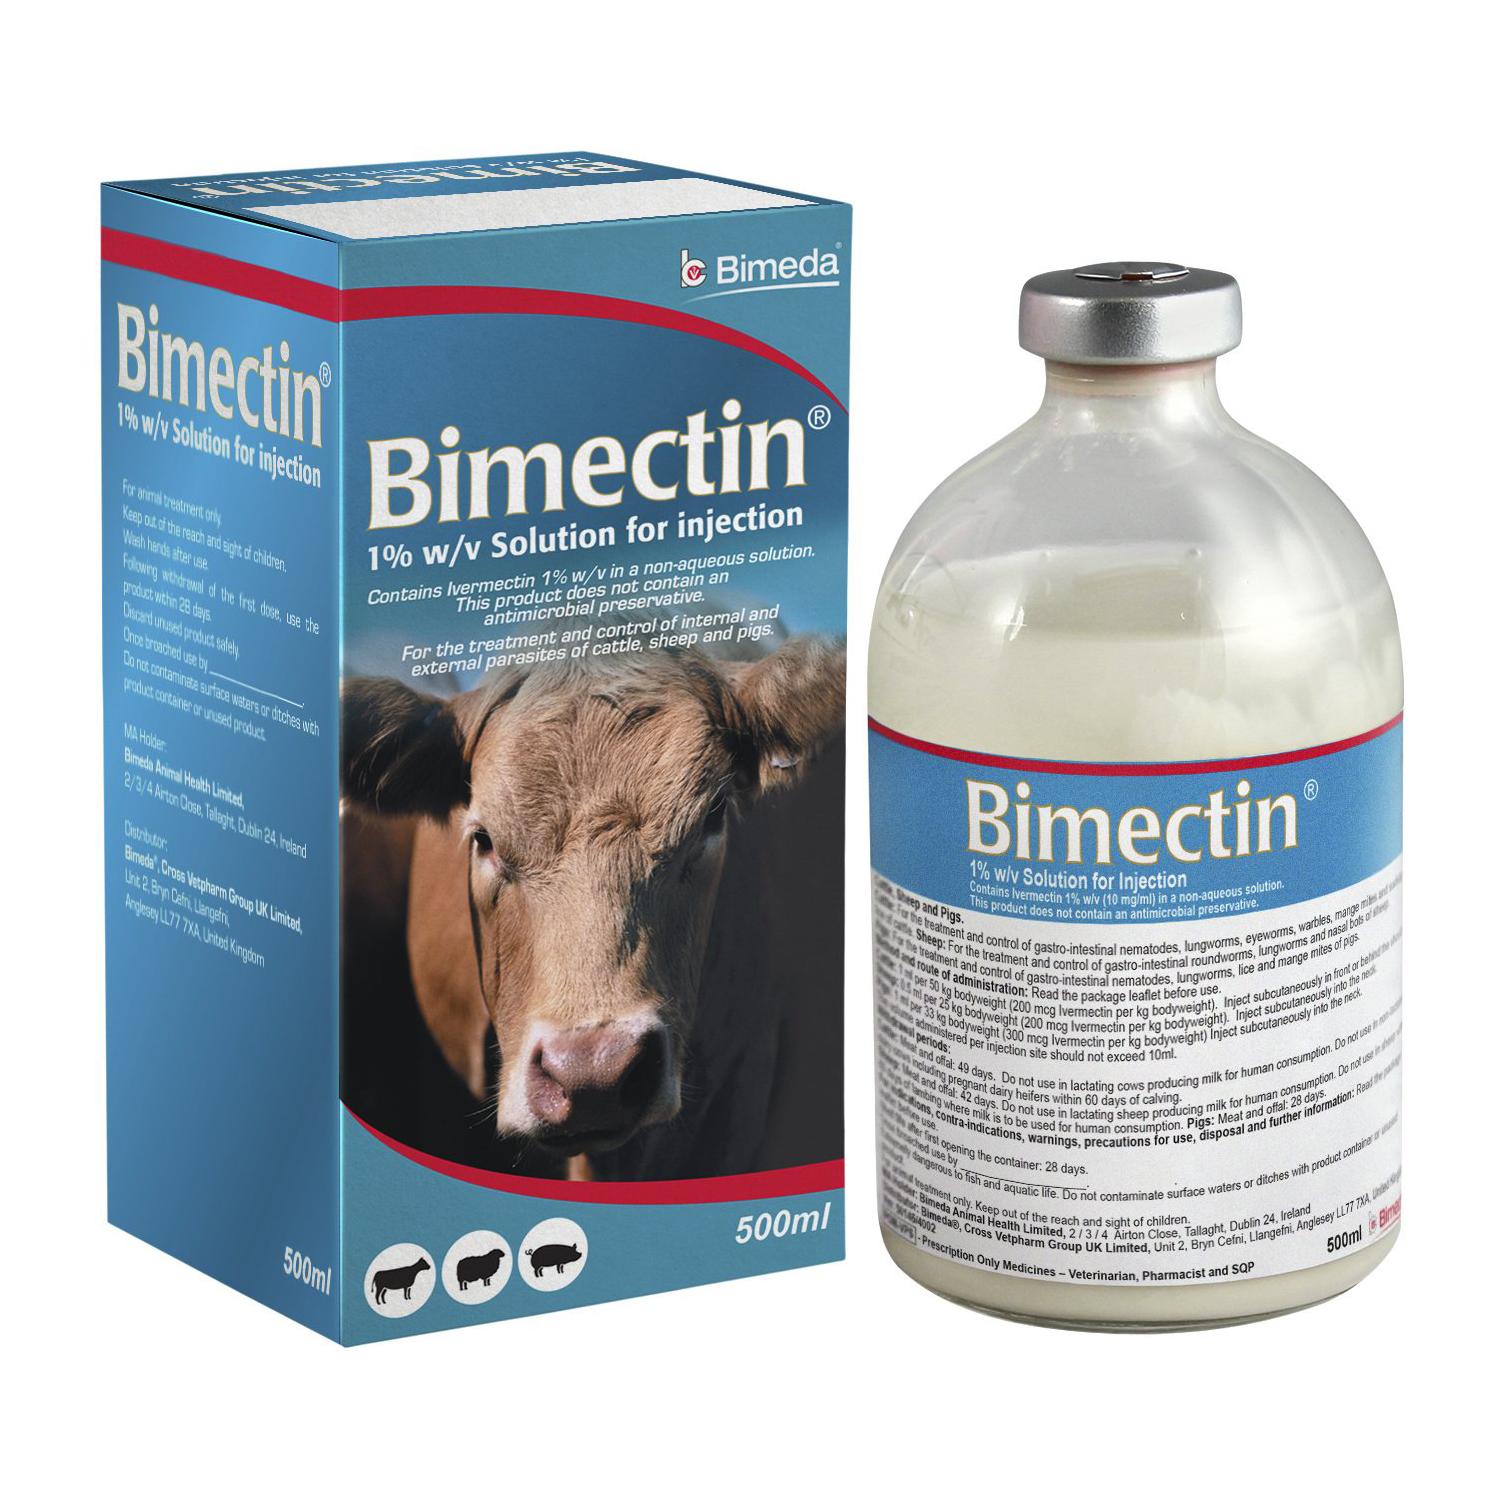 Bimectin 1% w/v Solution for Injection